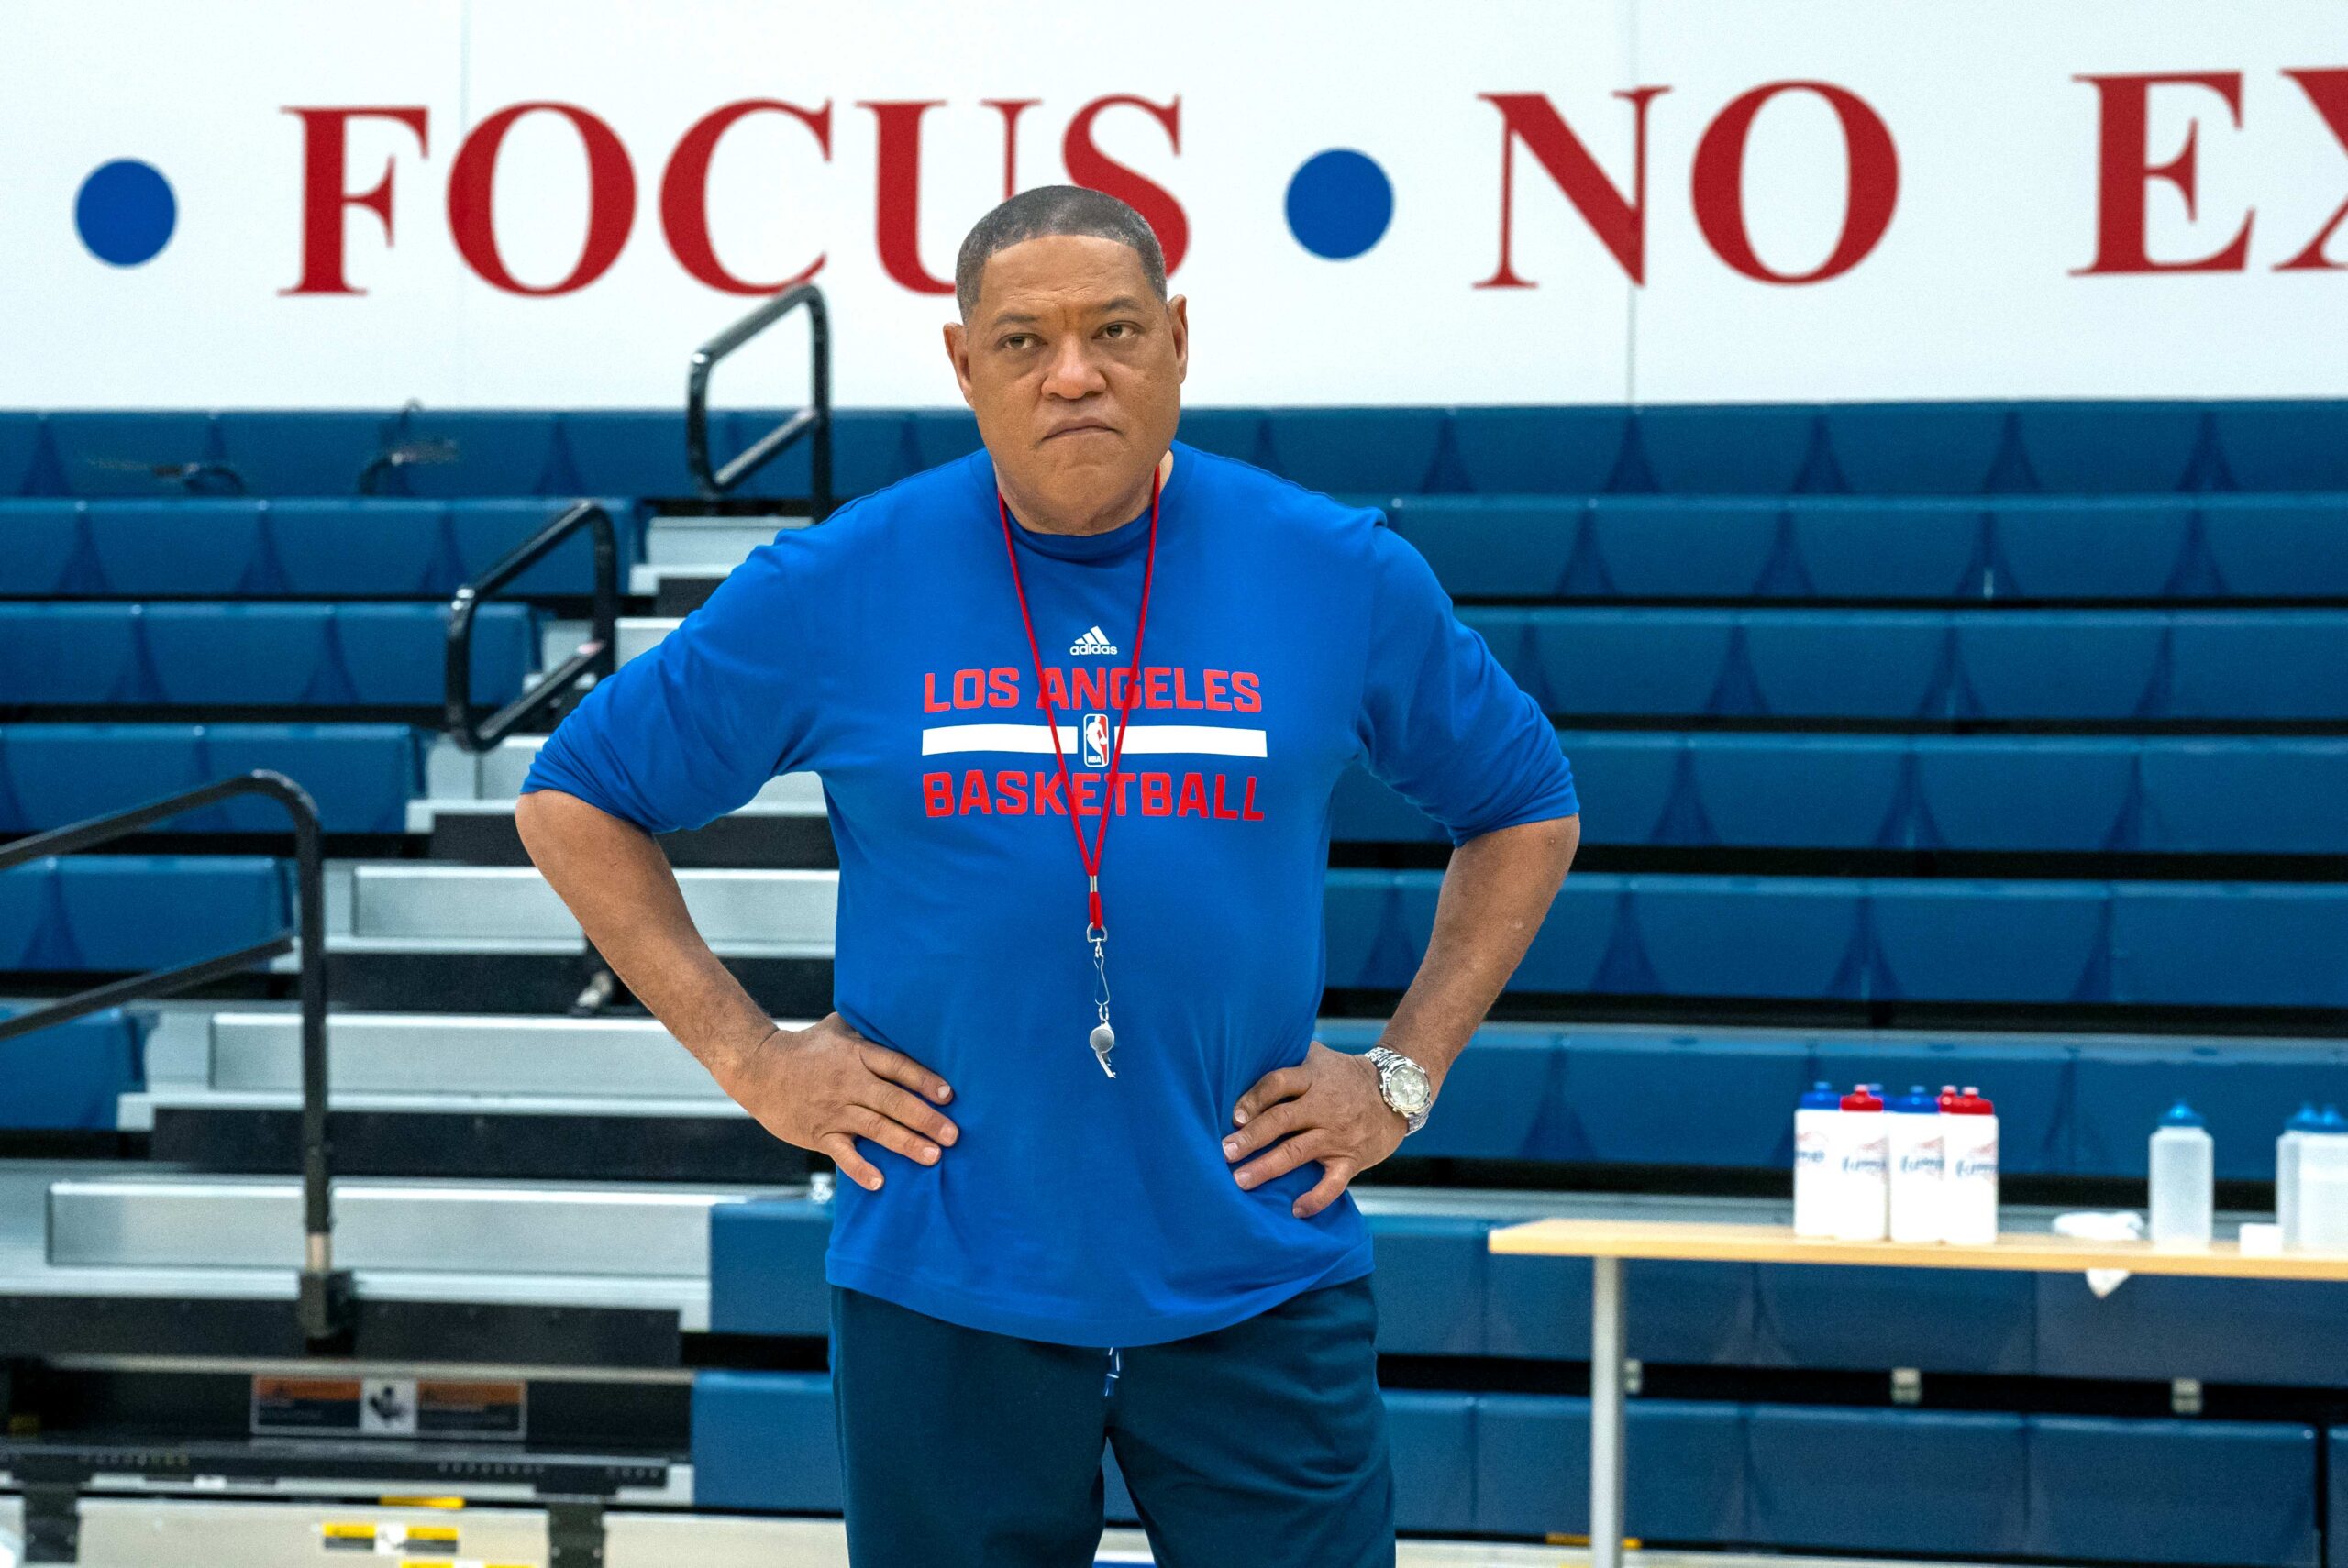 Laurence Fishburne Admits He Had No Idea Who Doc Rivers Was Before Portraying Him in 'Clipped'